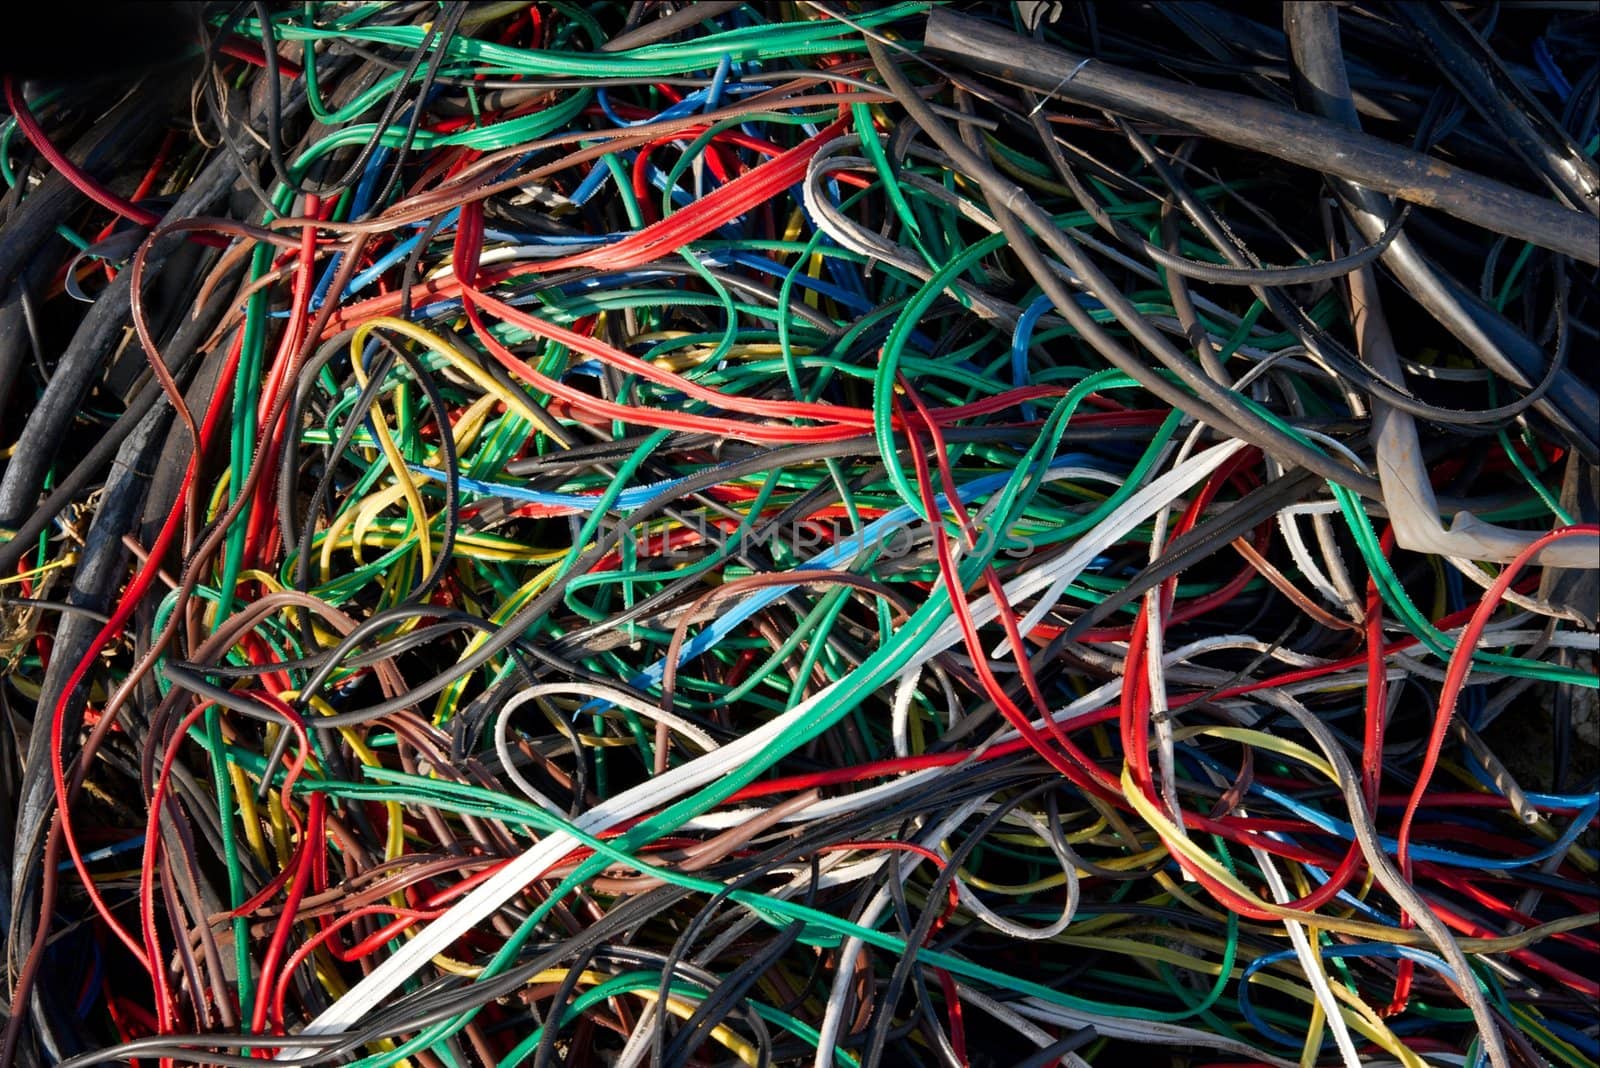 A big pile of colorful plastic cables